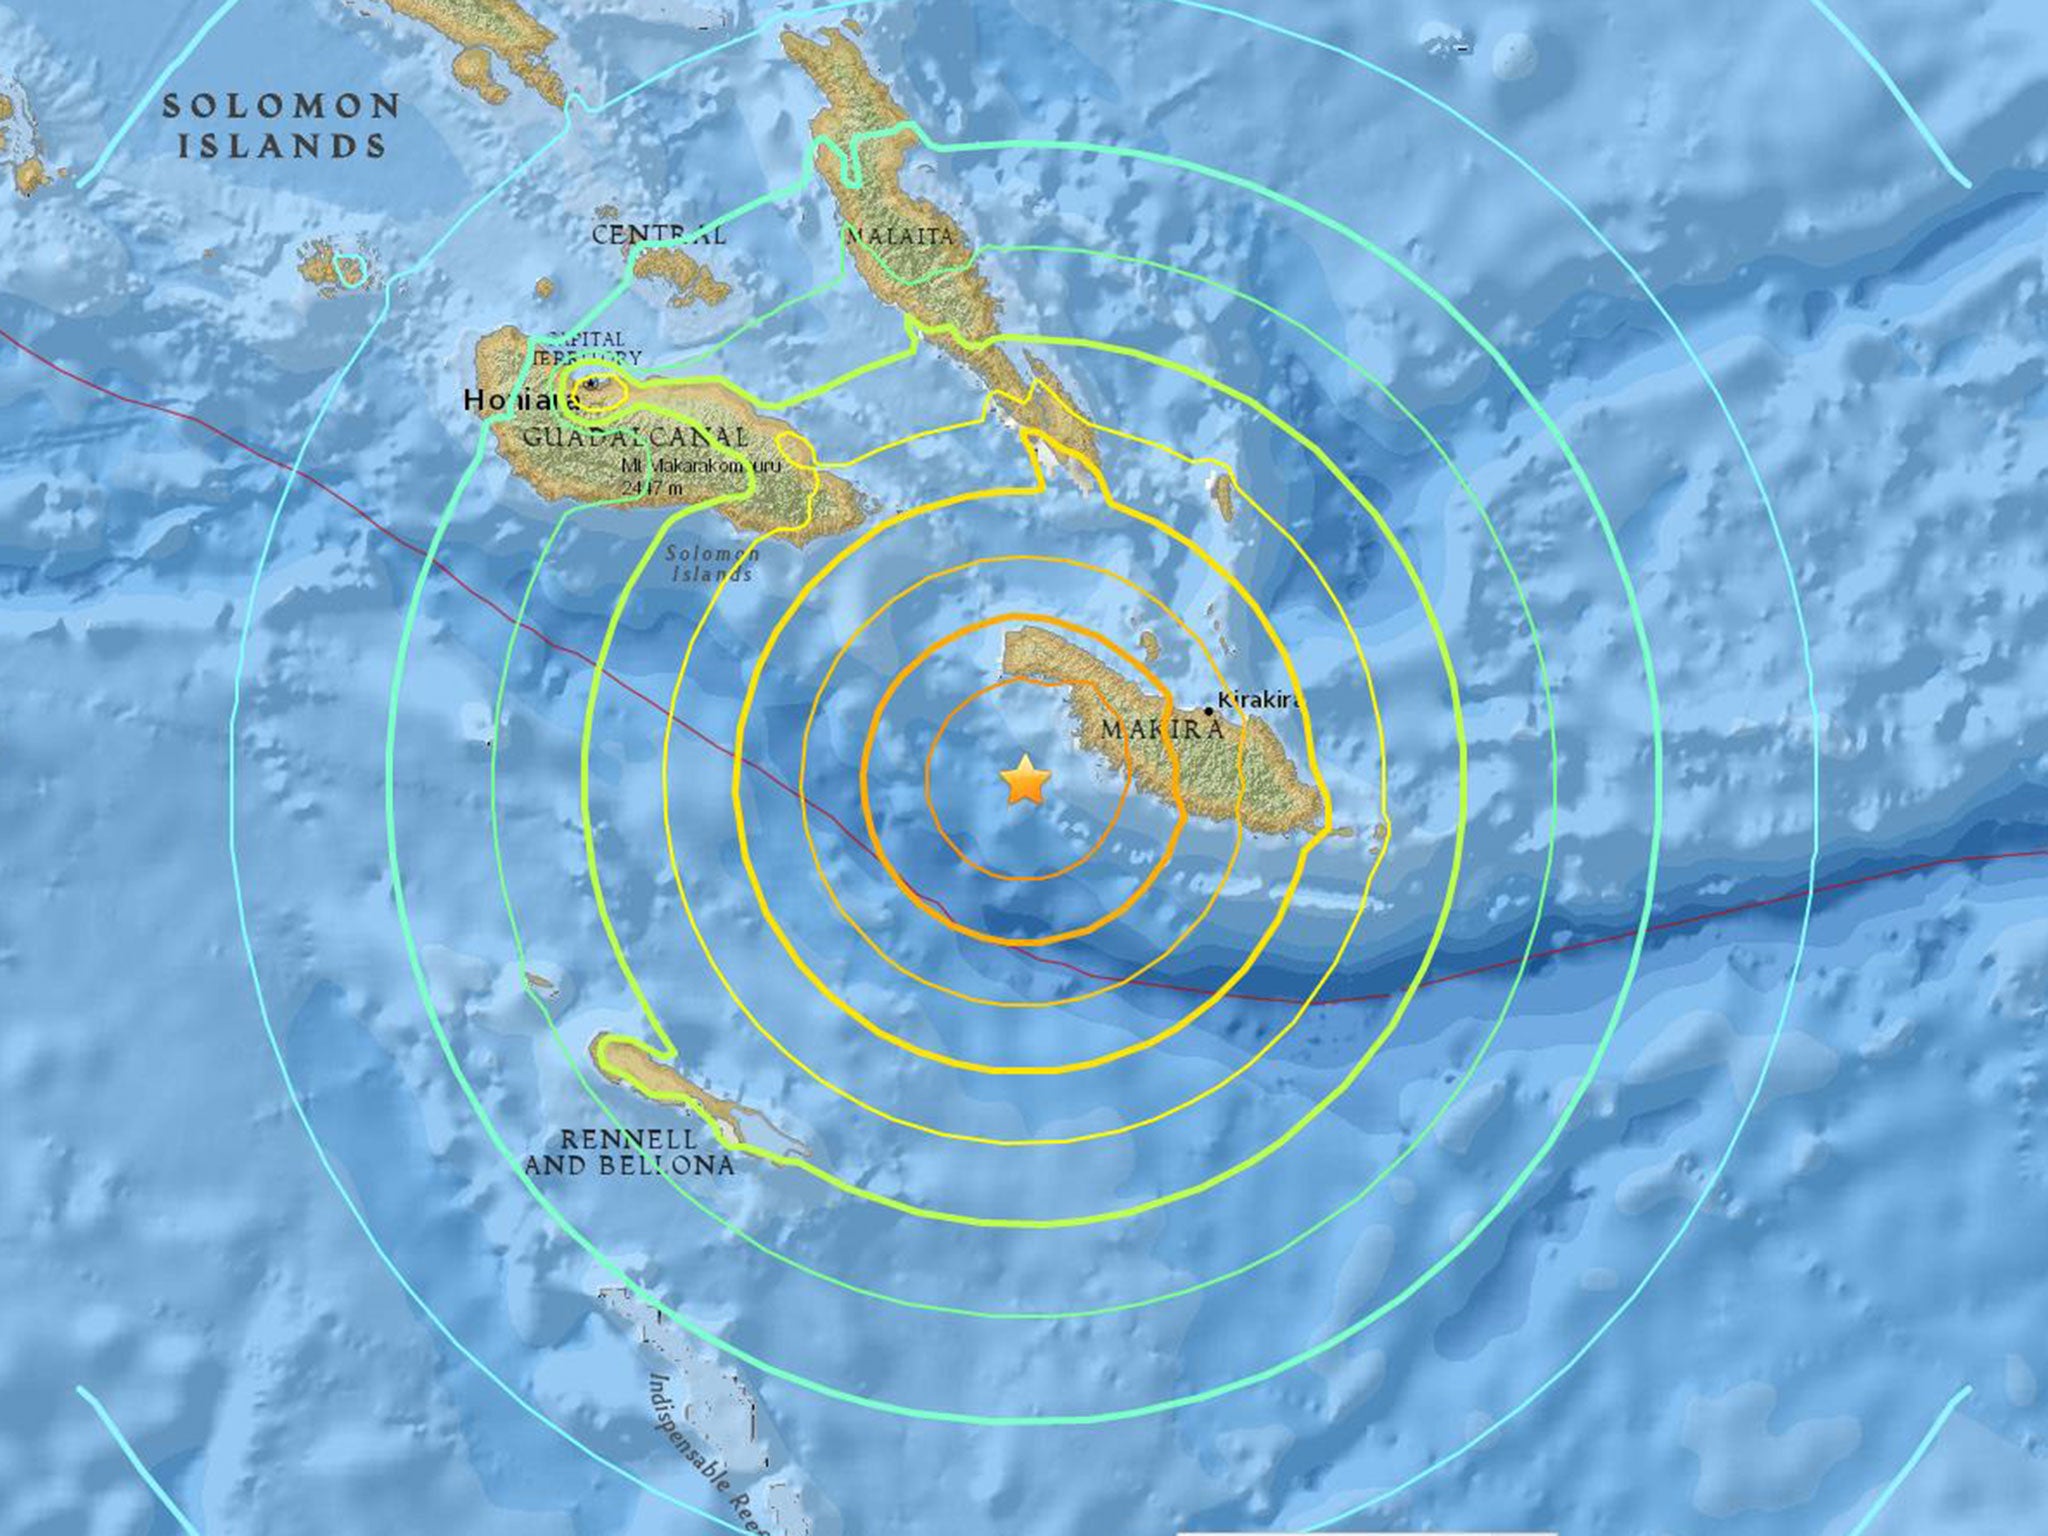 A 7.7 magnitude earthquake struck off the coast of the Solomon Islands on 8 December